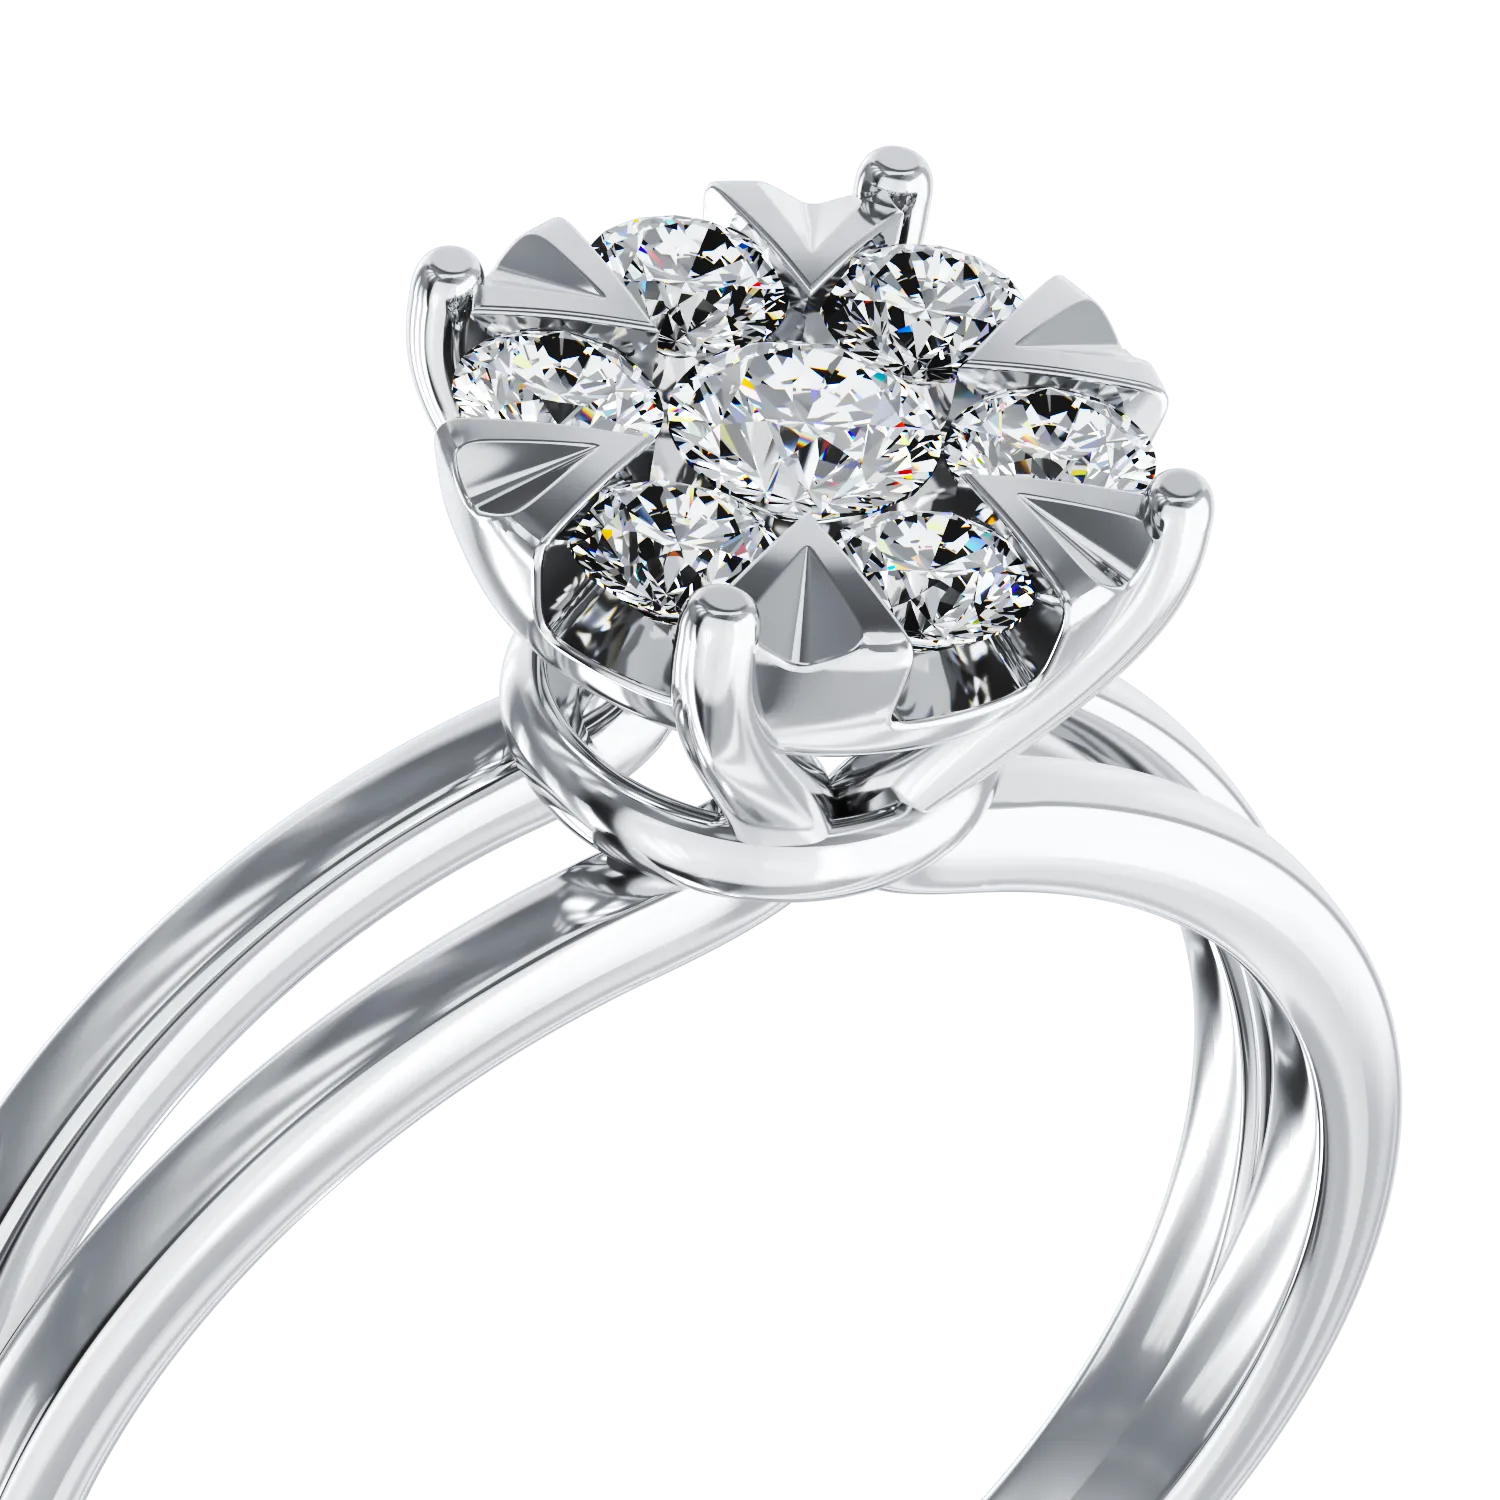 18K white gold engagement ring with 0.34ct diamonds